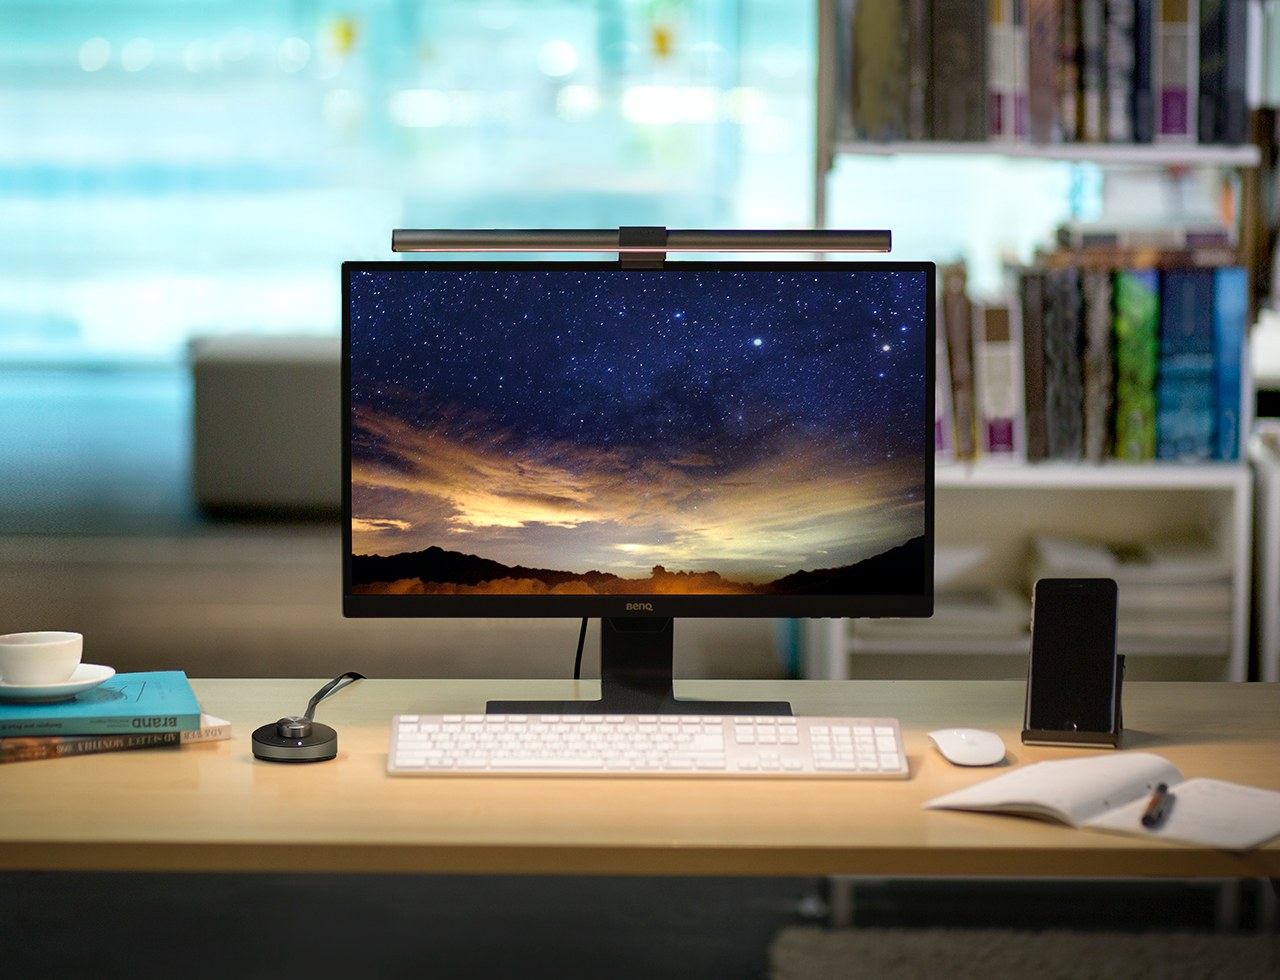 This monitor light bar is the most important desk accessory nobody